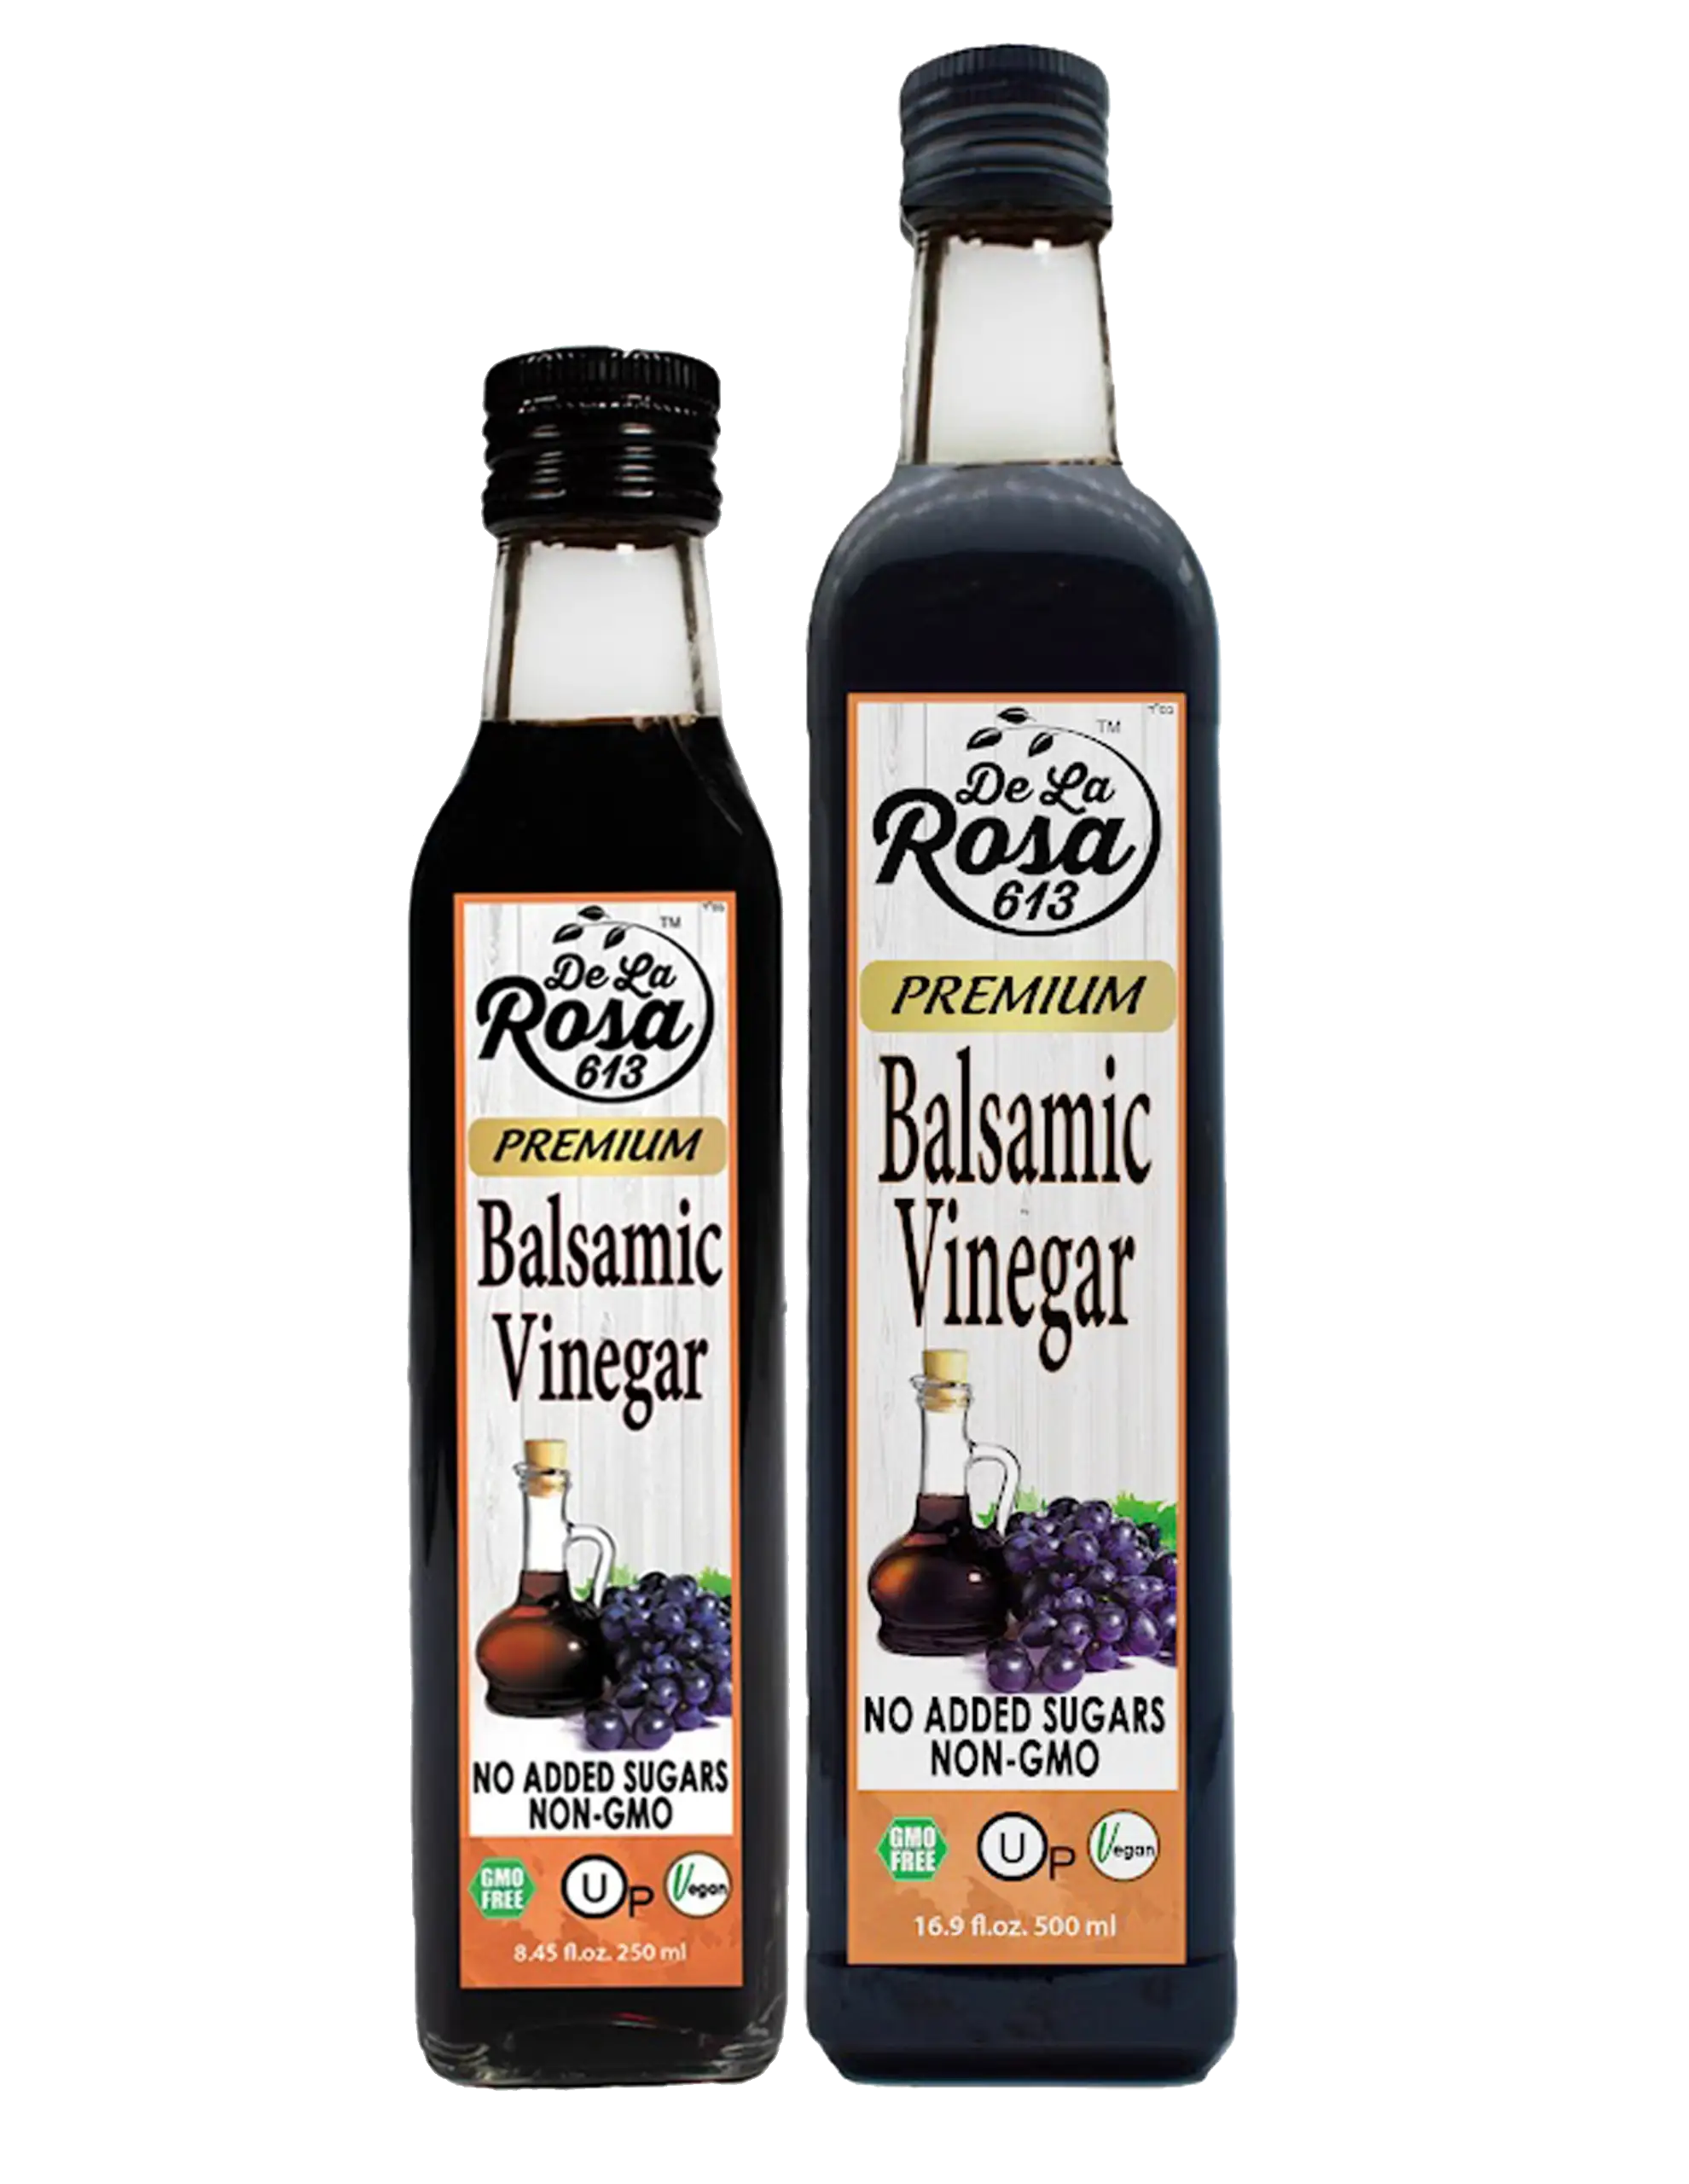 CONVENTIONAL BALSAMIC VINEGAR PRODUCTS